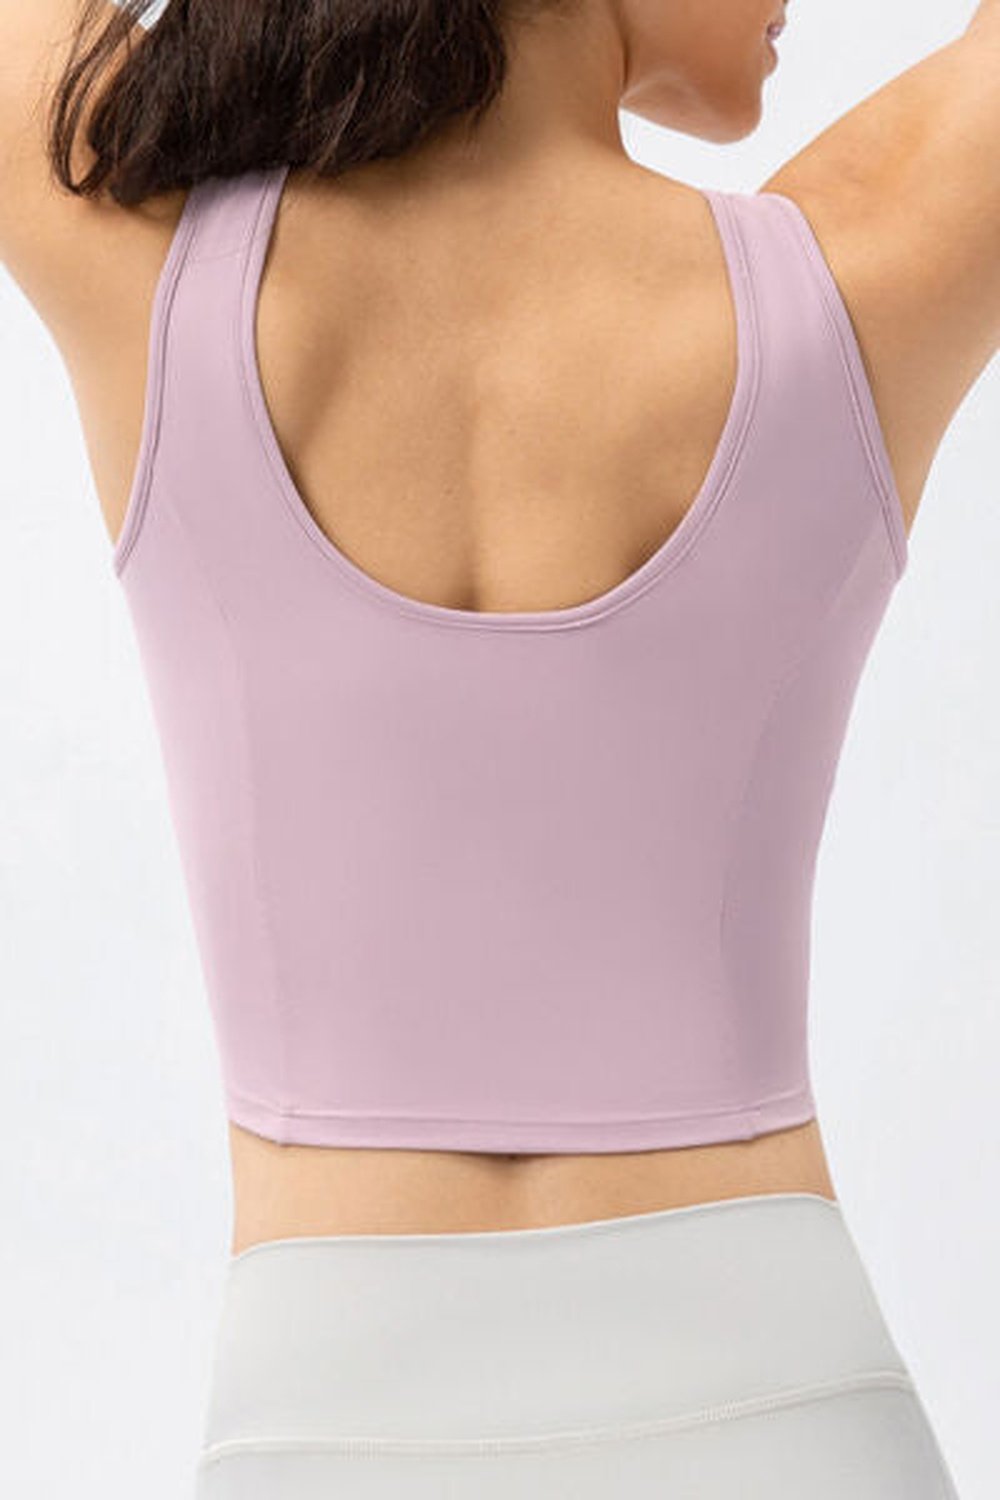 Round Neck Wide Strap Active Tank - Crop Tops & Tank Tops - FITGGINS